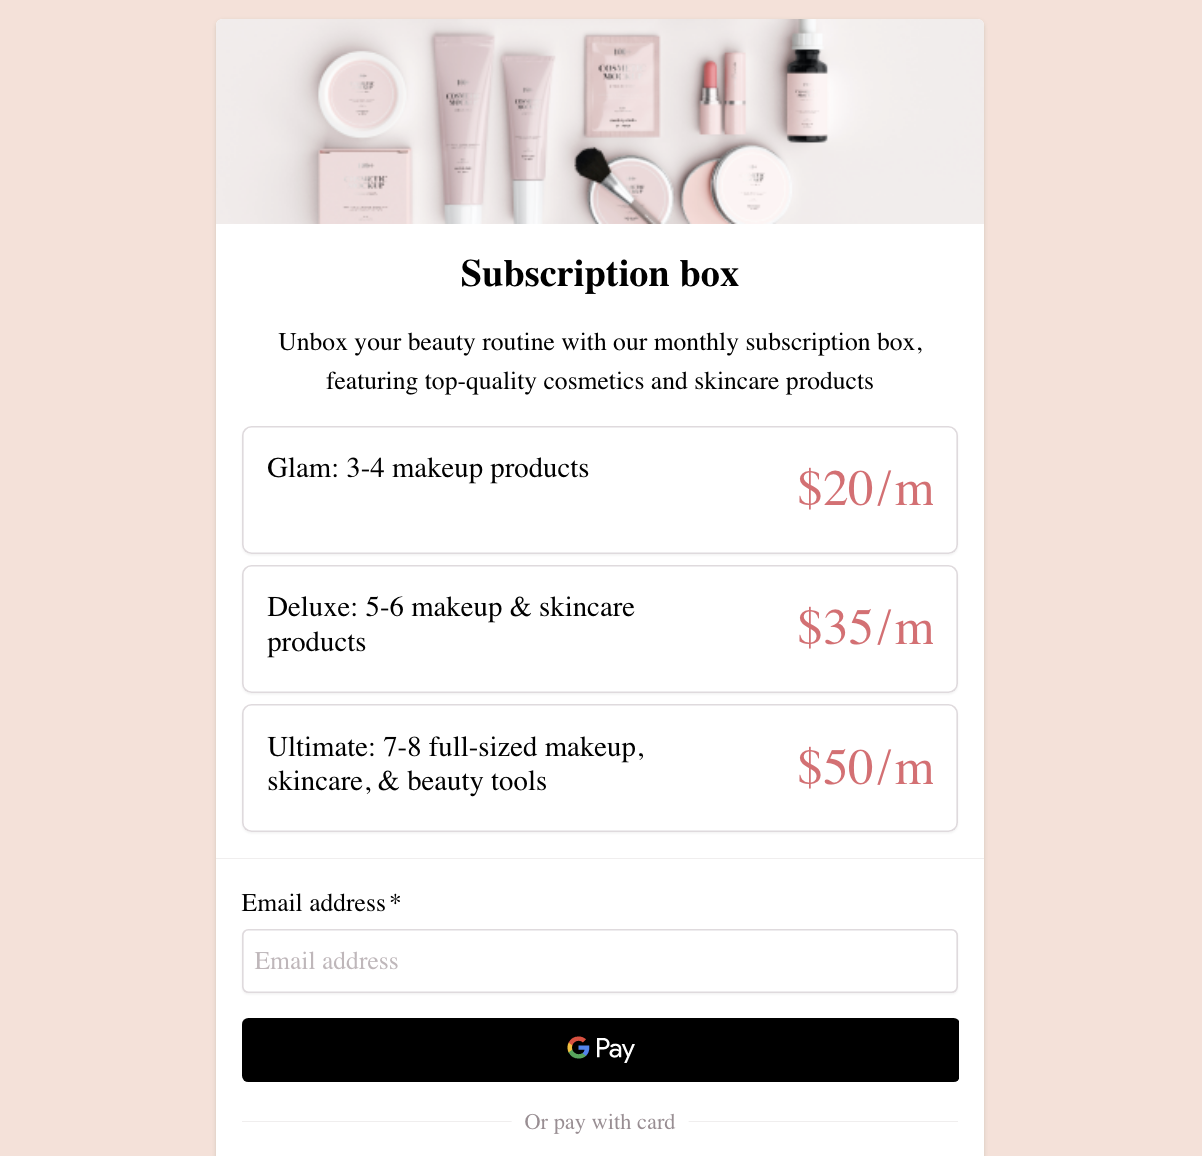 Subscription box business using tiered pricing model to sell subscriptions to customers